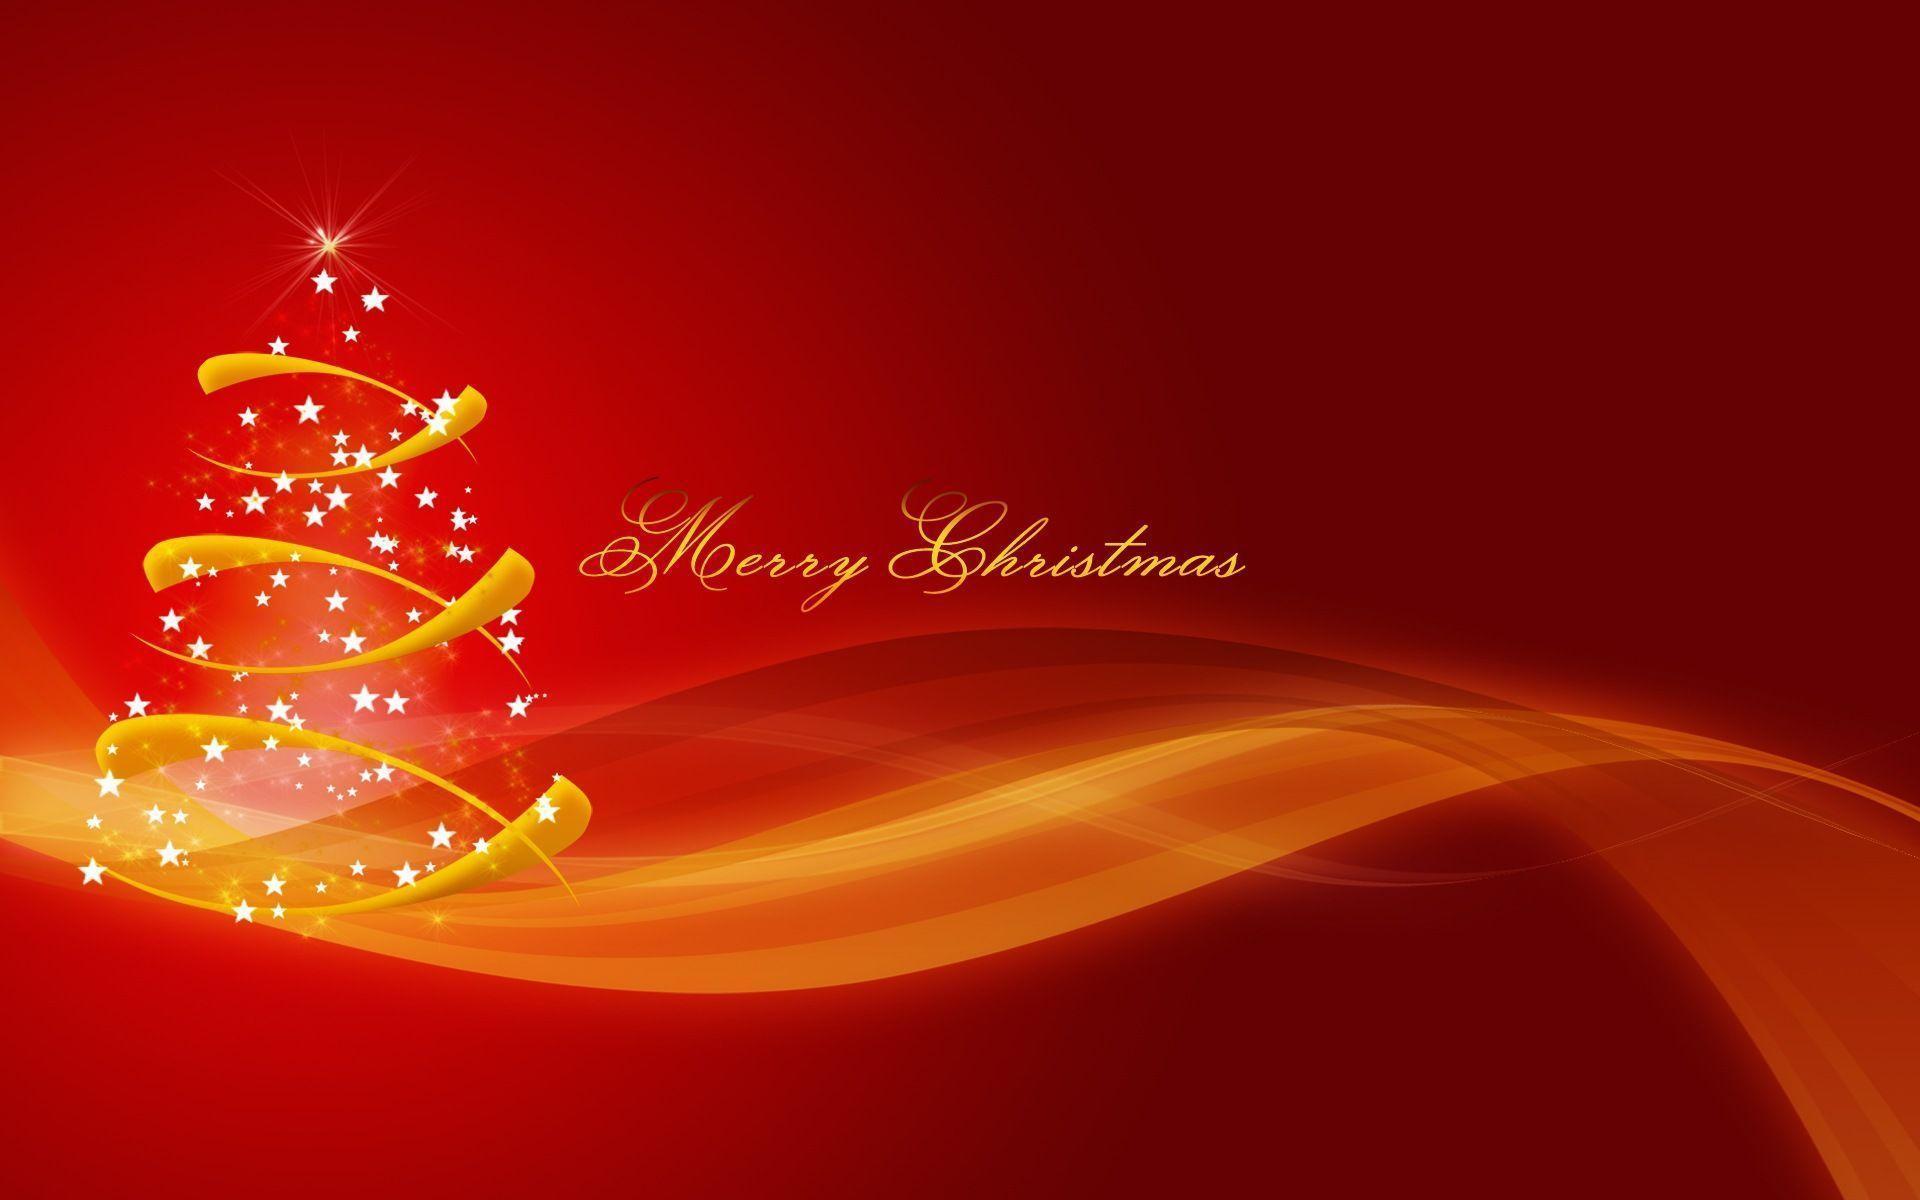 HD happy holidays wallpaper download free, New year